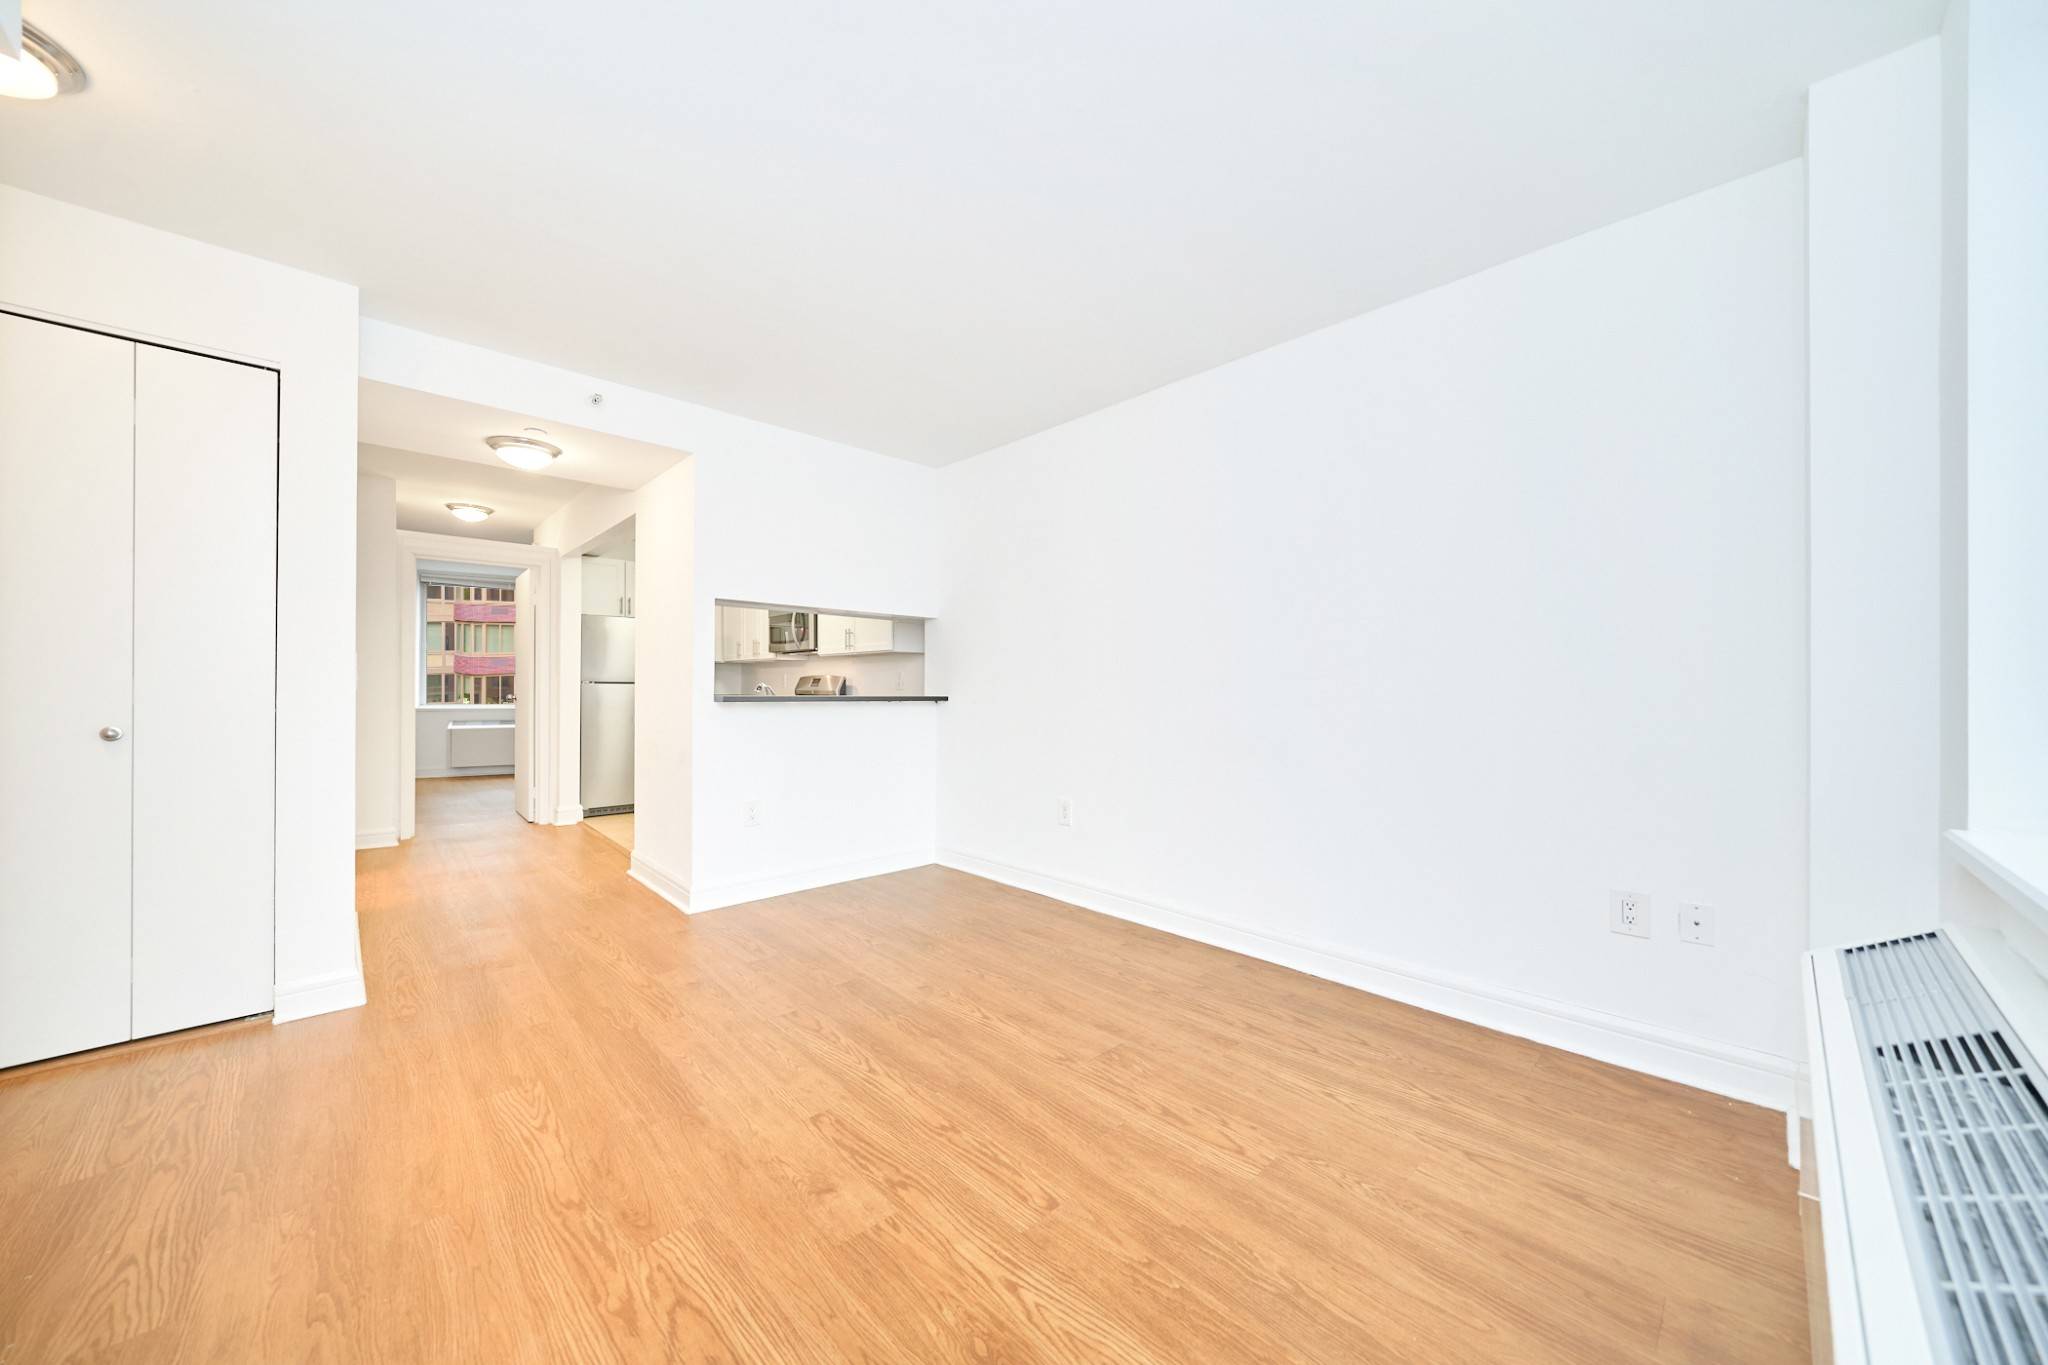 This 1 bedroom is a total steal and is located in the heart of Lincoln Square in the iconic building at 160 Riverside BlvdPrice reflects 1FM on 12 Mo Lease.